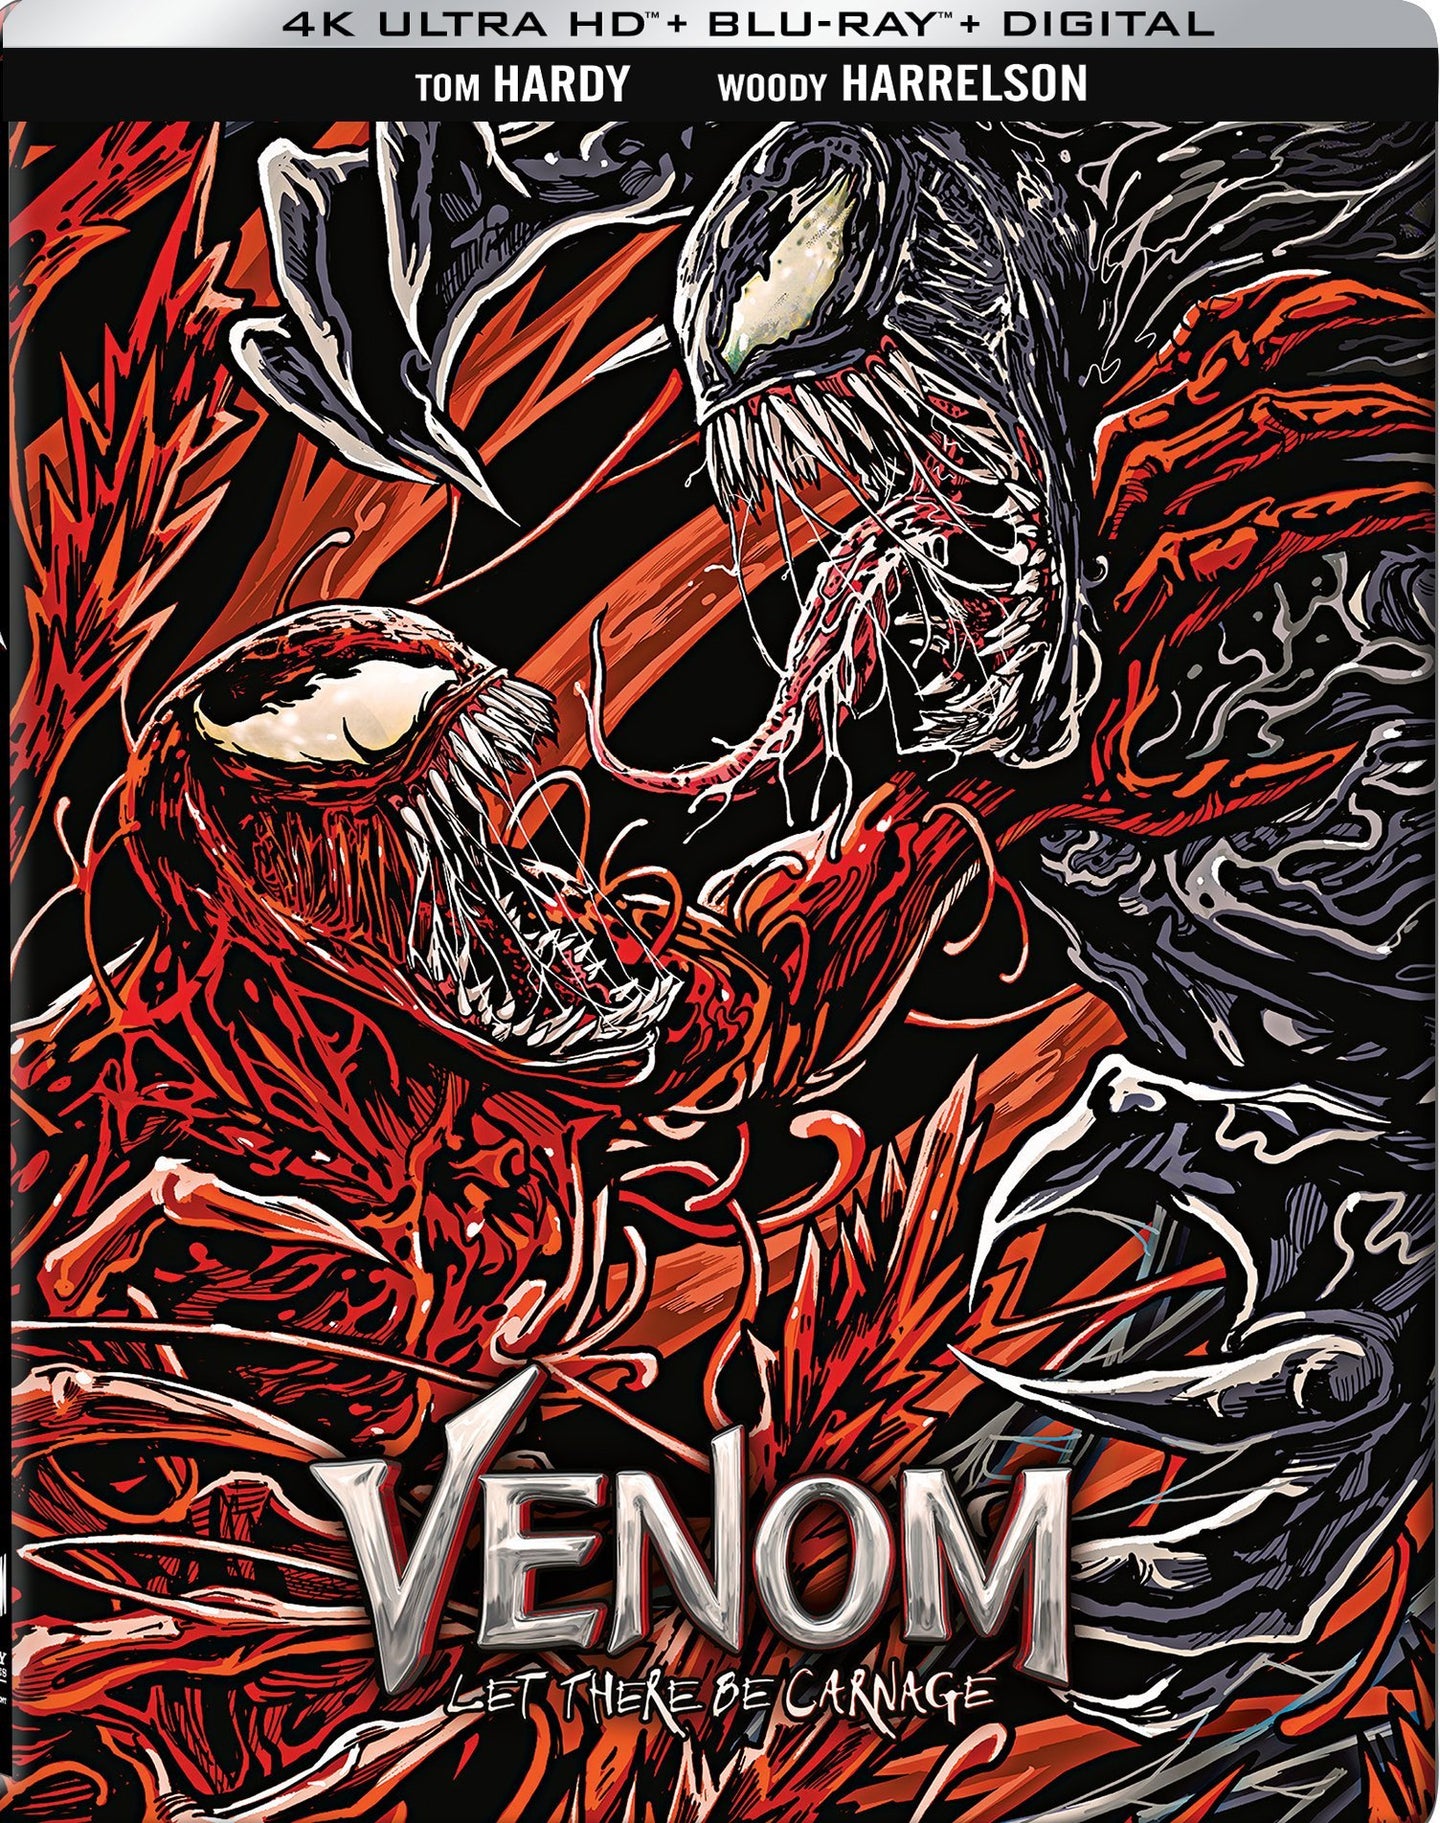 Venom: Let There Be Carnage (2021) Vudu or Movies Anywhere 4K code